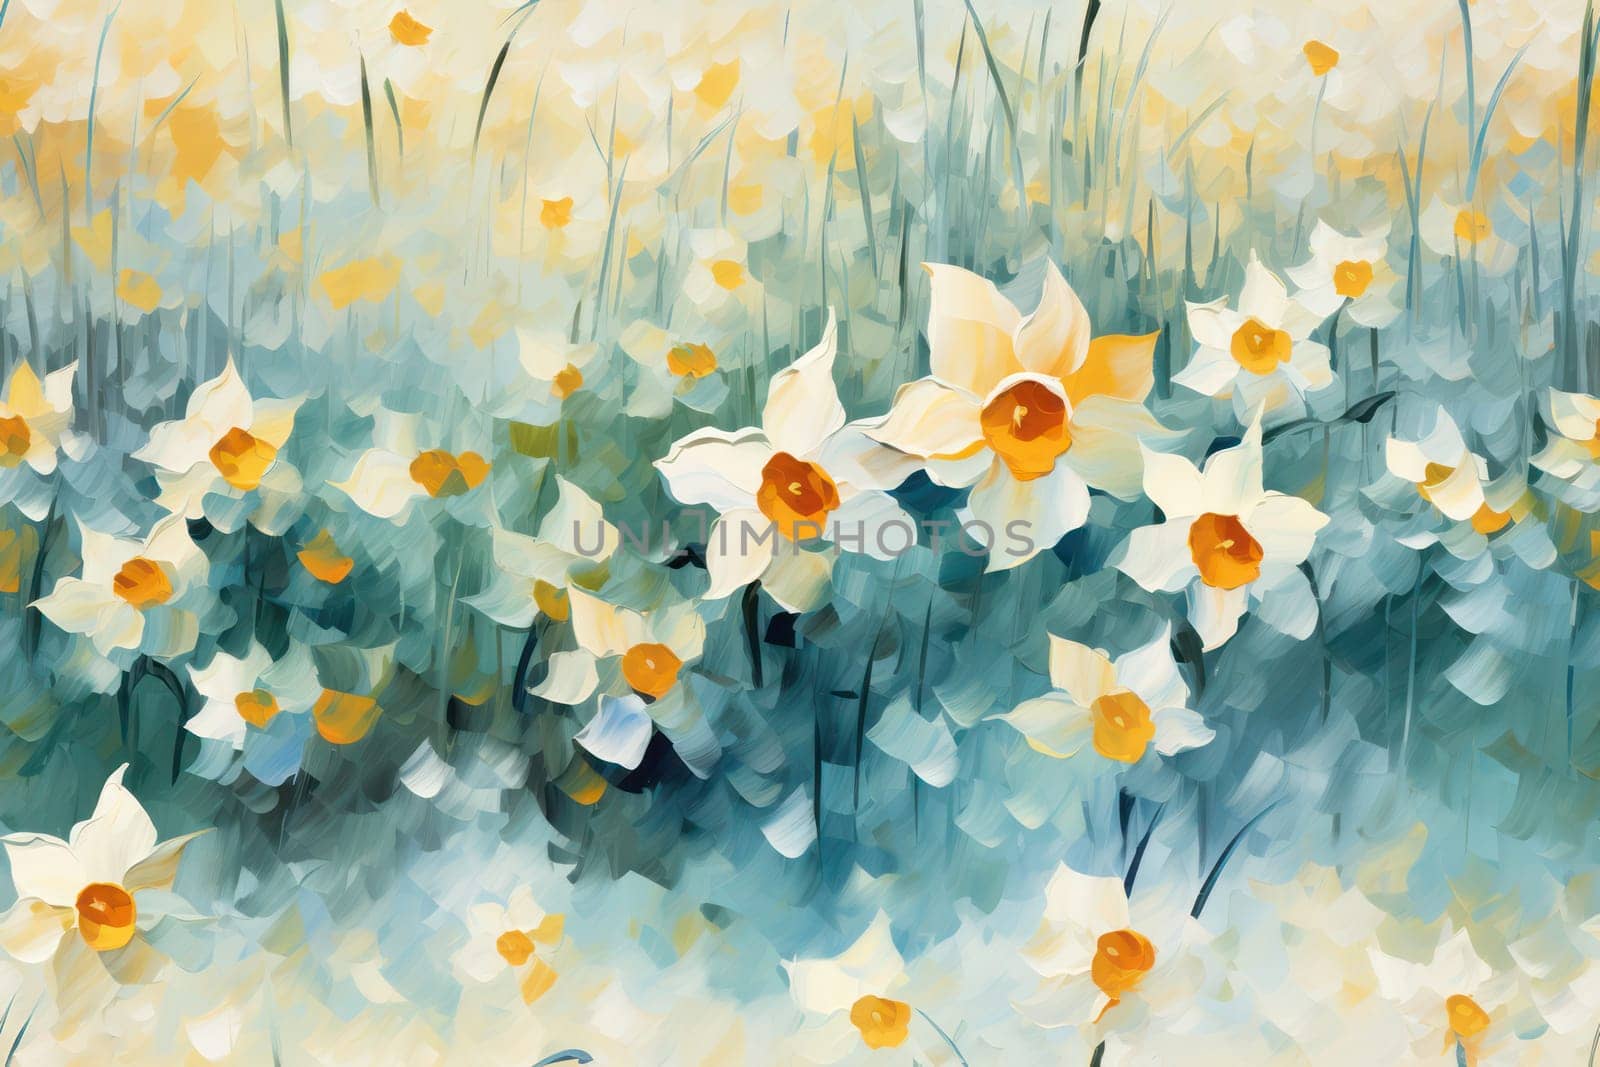 Spring Blossoms: A Colorful Floral Bouquet of Narcissus Blooming in a Bright Yellow Meadow